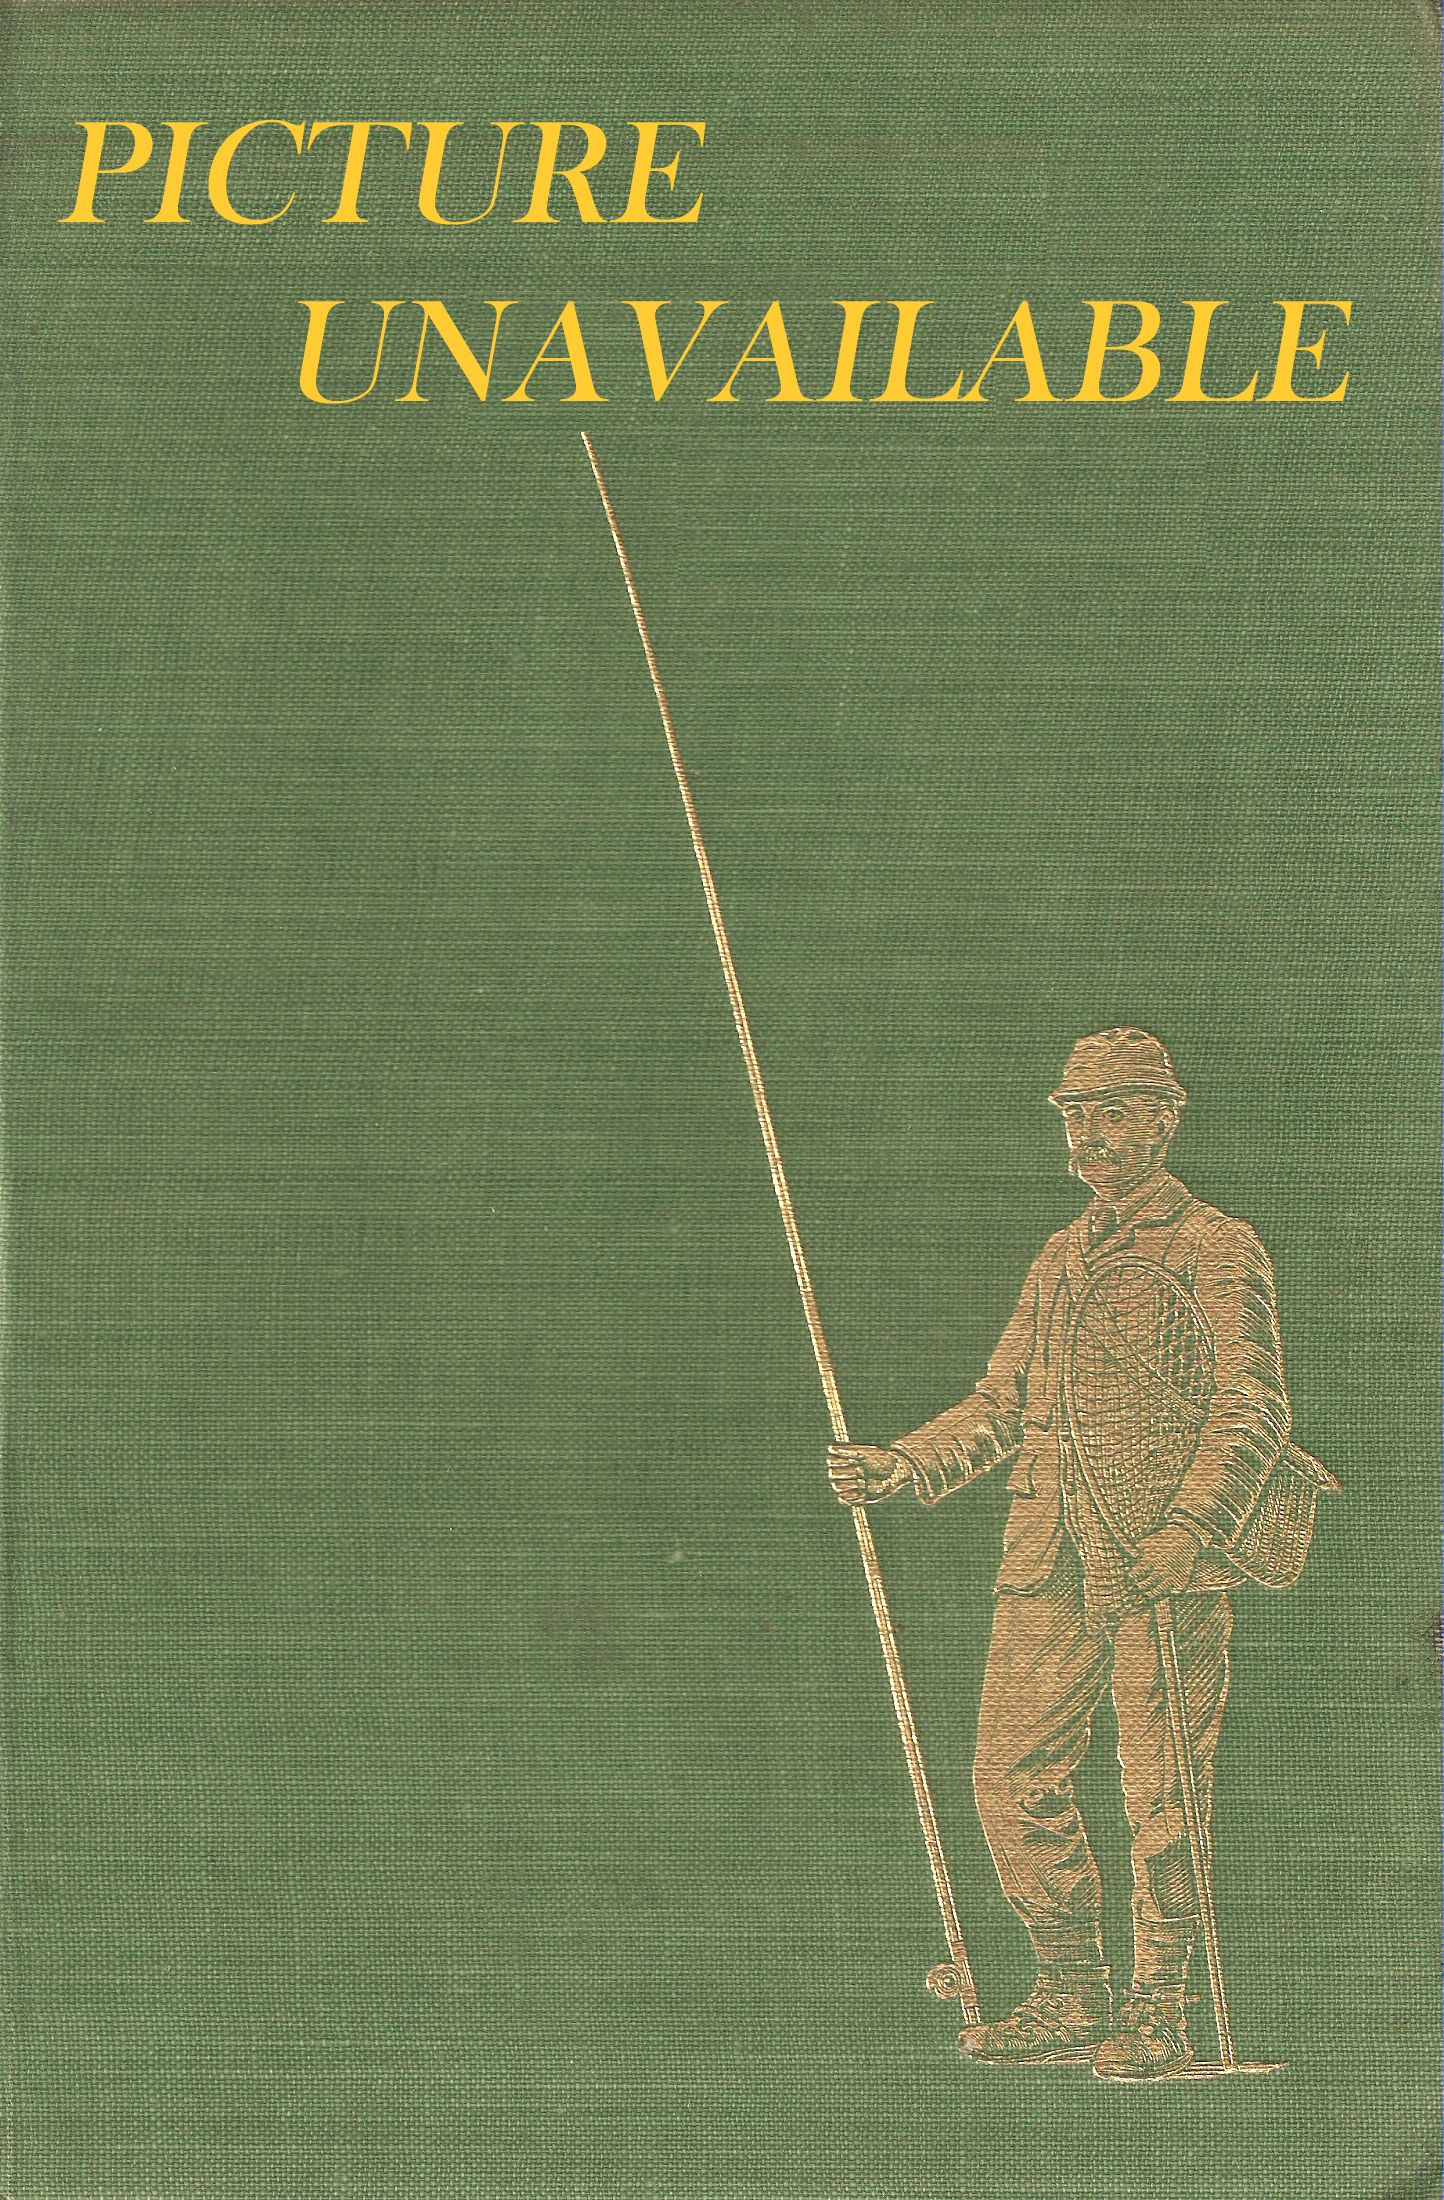 ANGLING HOLIDAYS IN PURSUIT OF SALMON, TROUT AND PIKE. By C.W. Gedney.